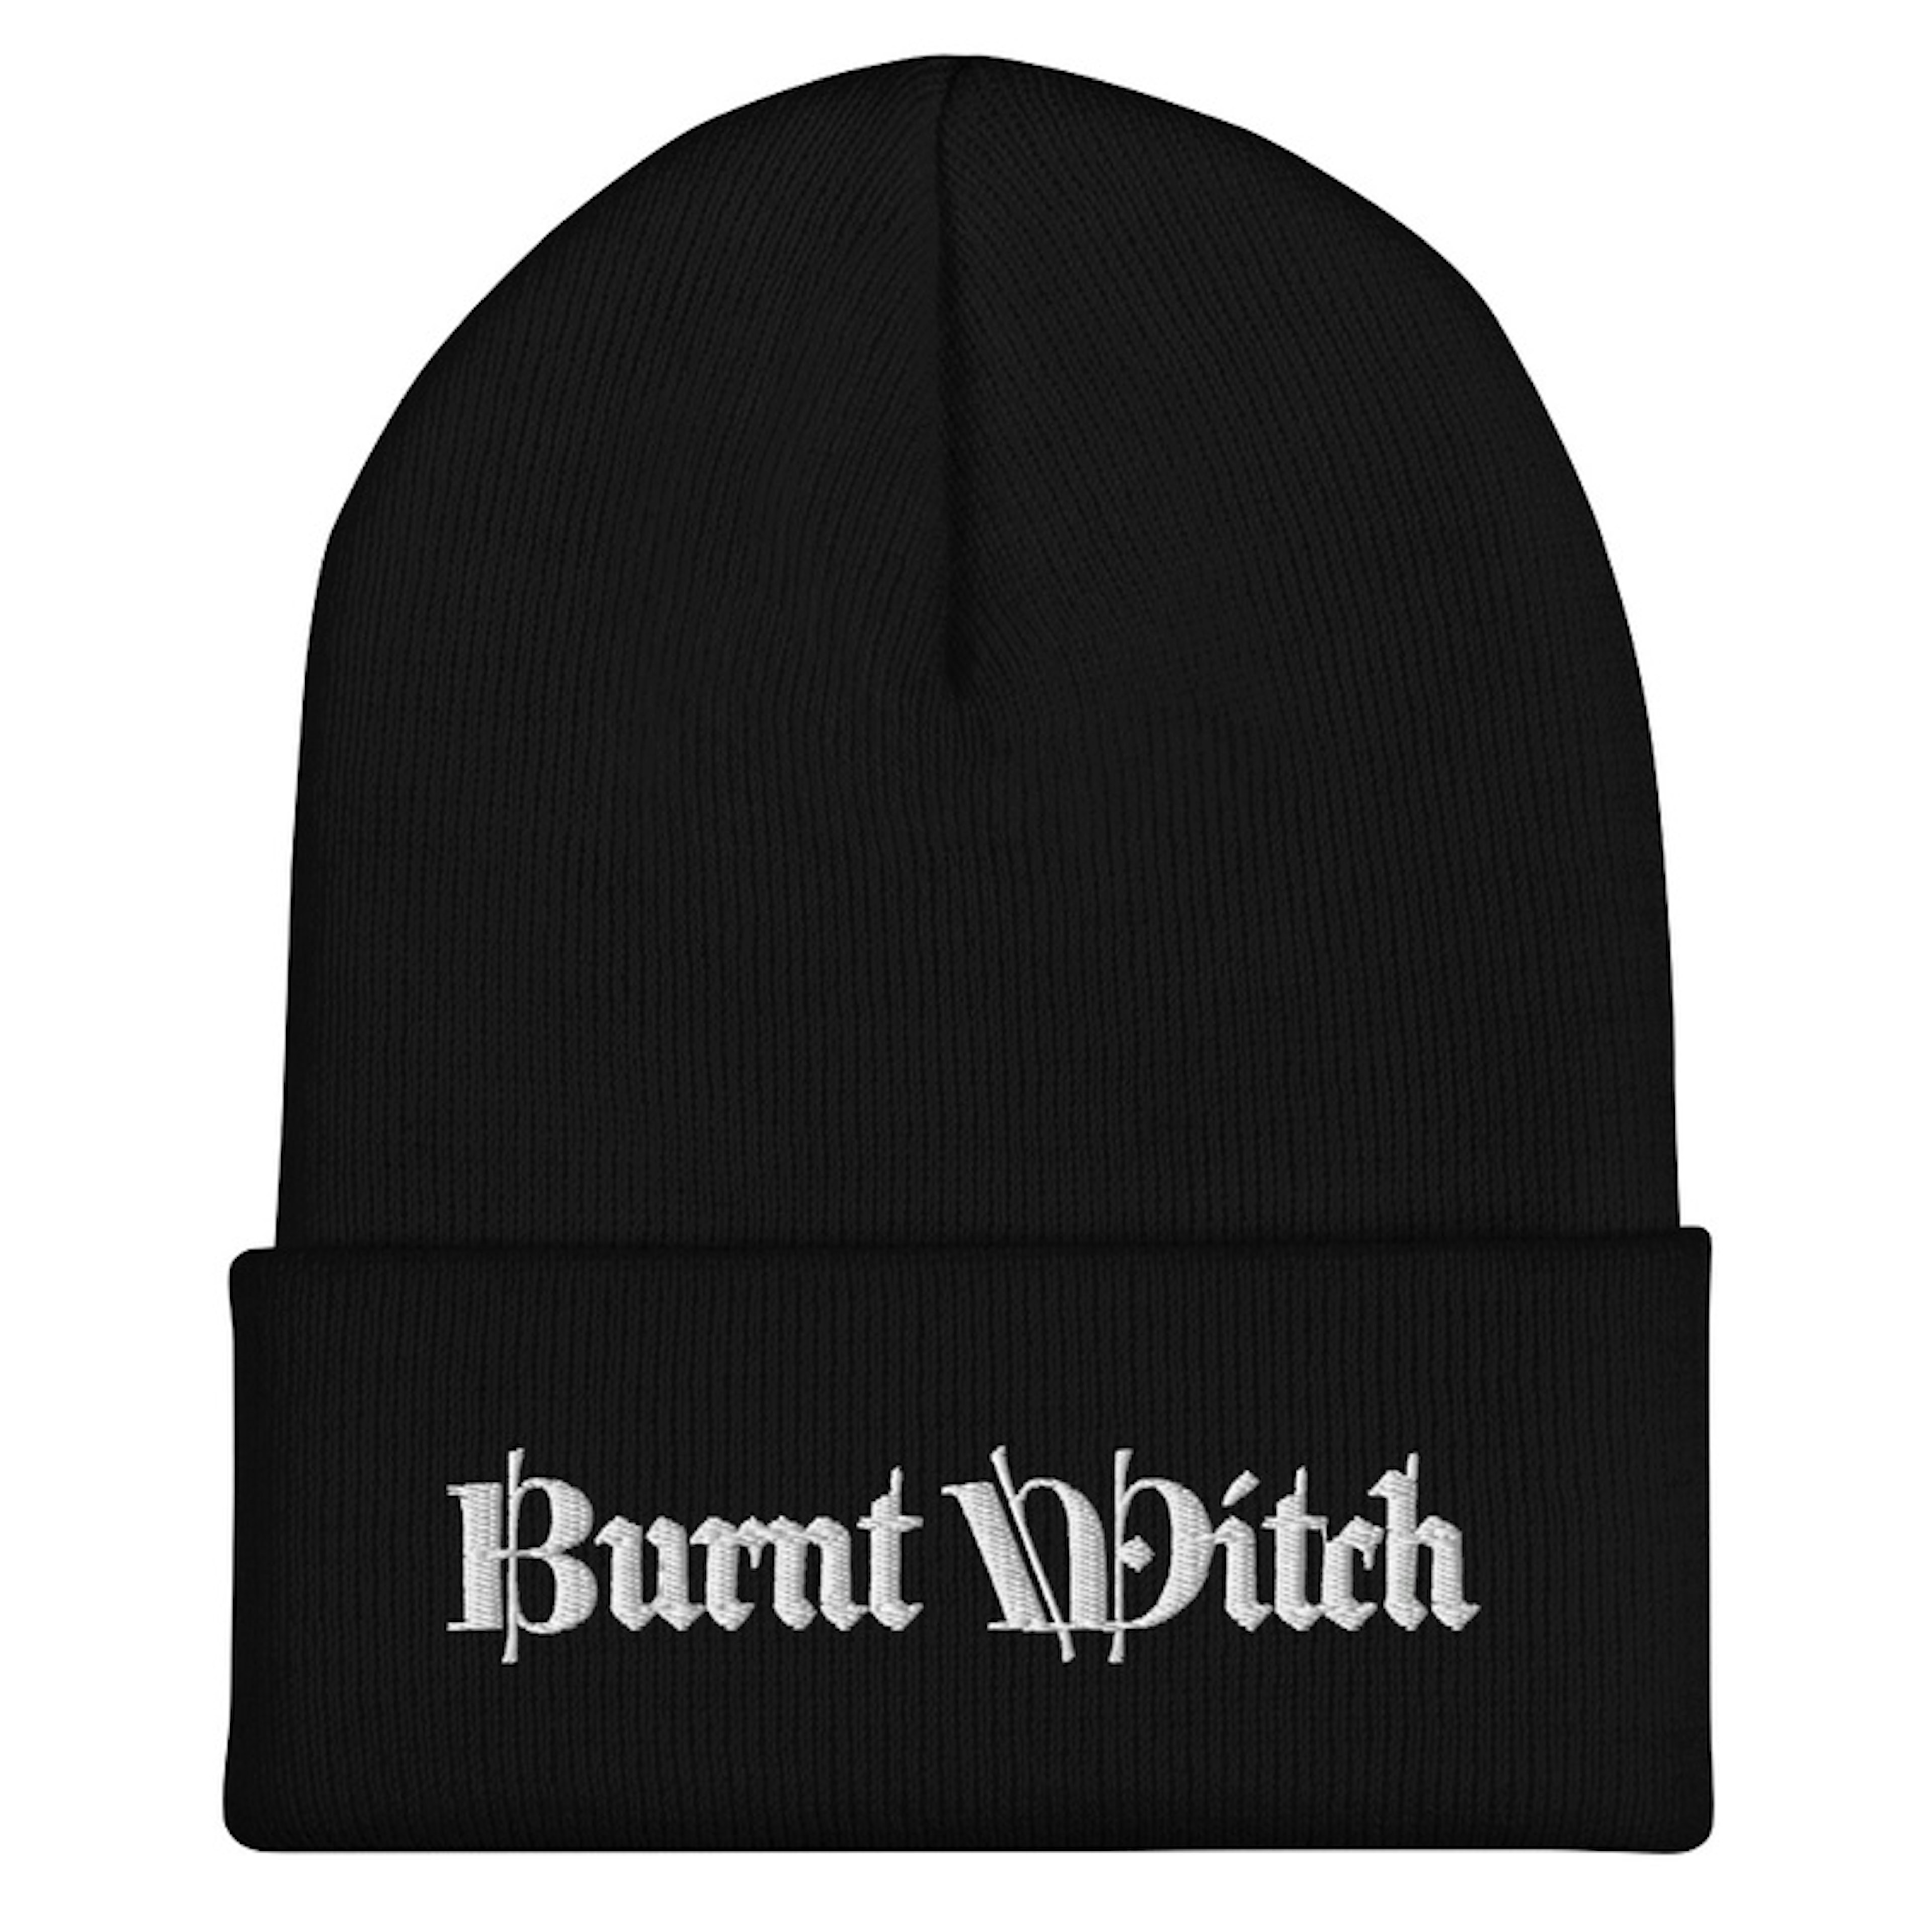 Burnt Witches Beanie